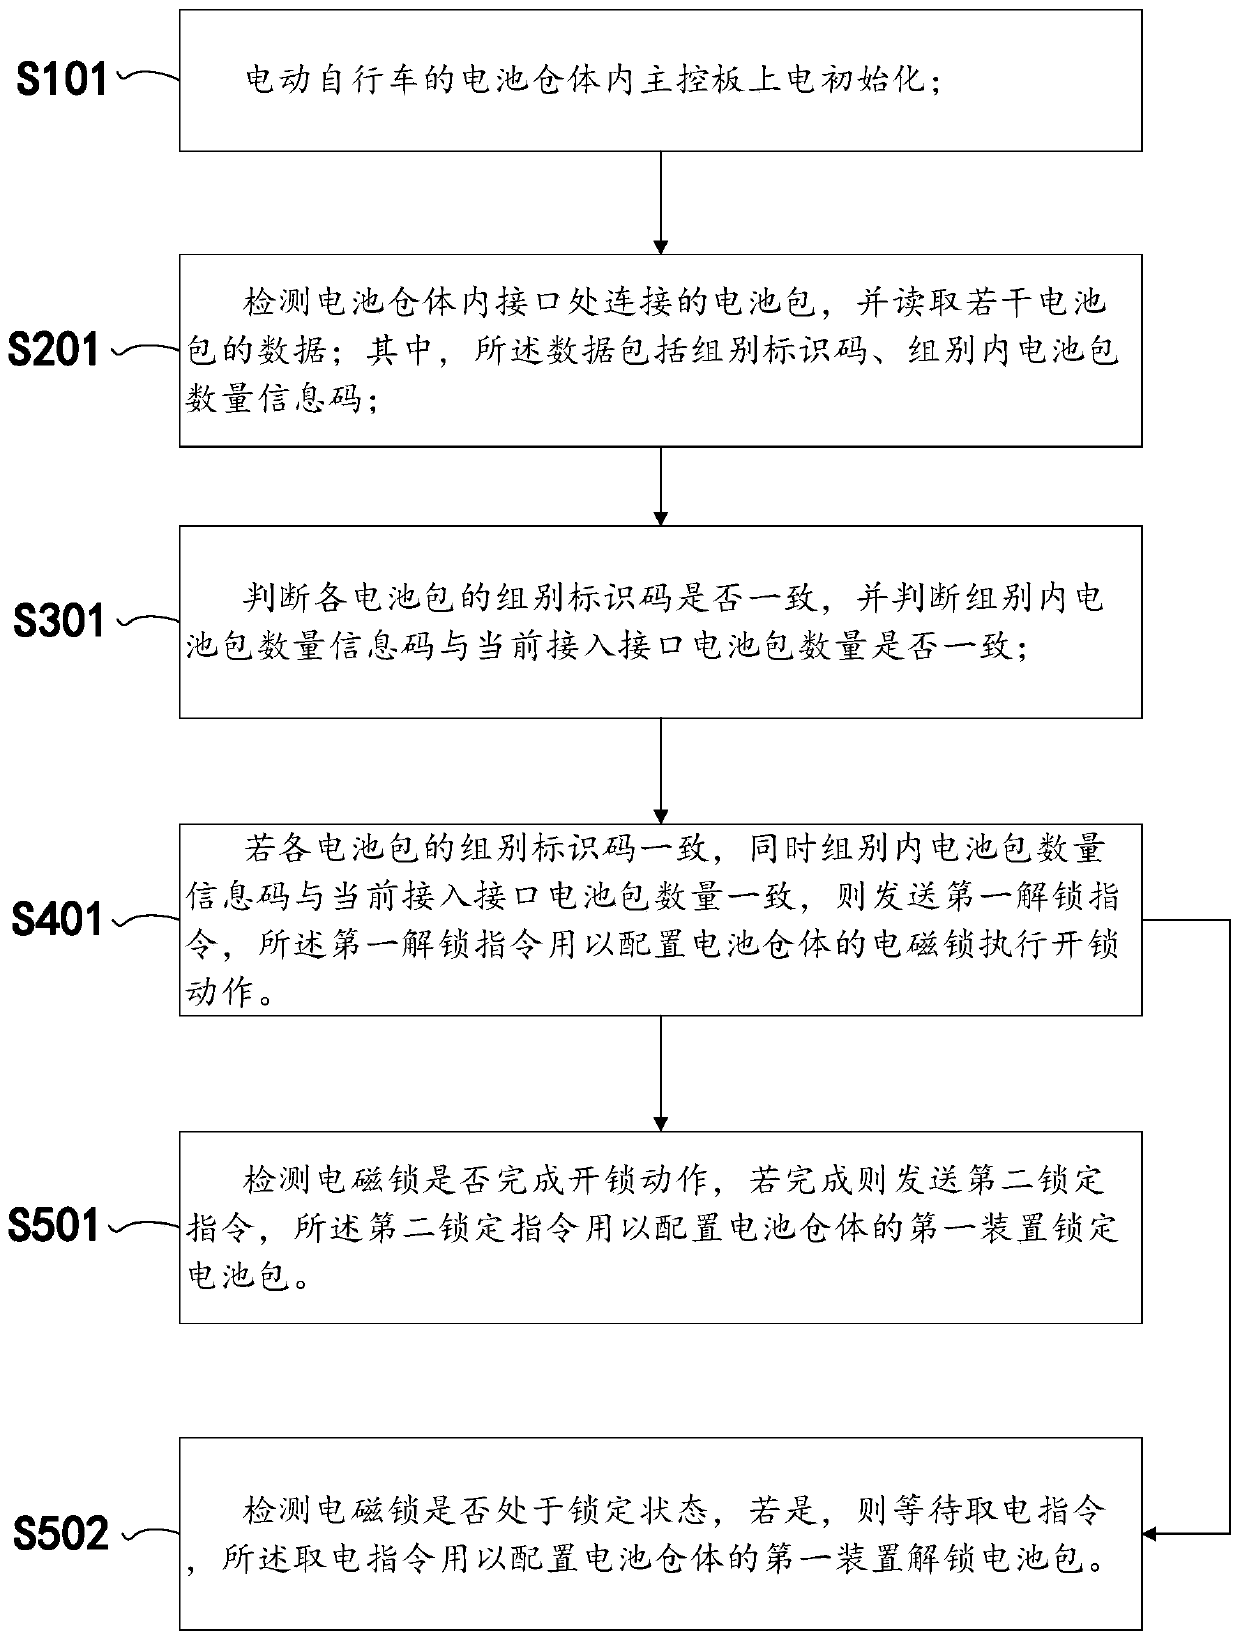 Unlocking method of pile-free electric bicycle and battery compartment with lock